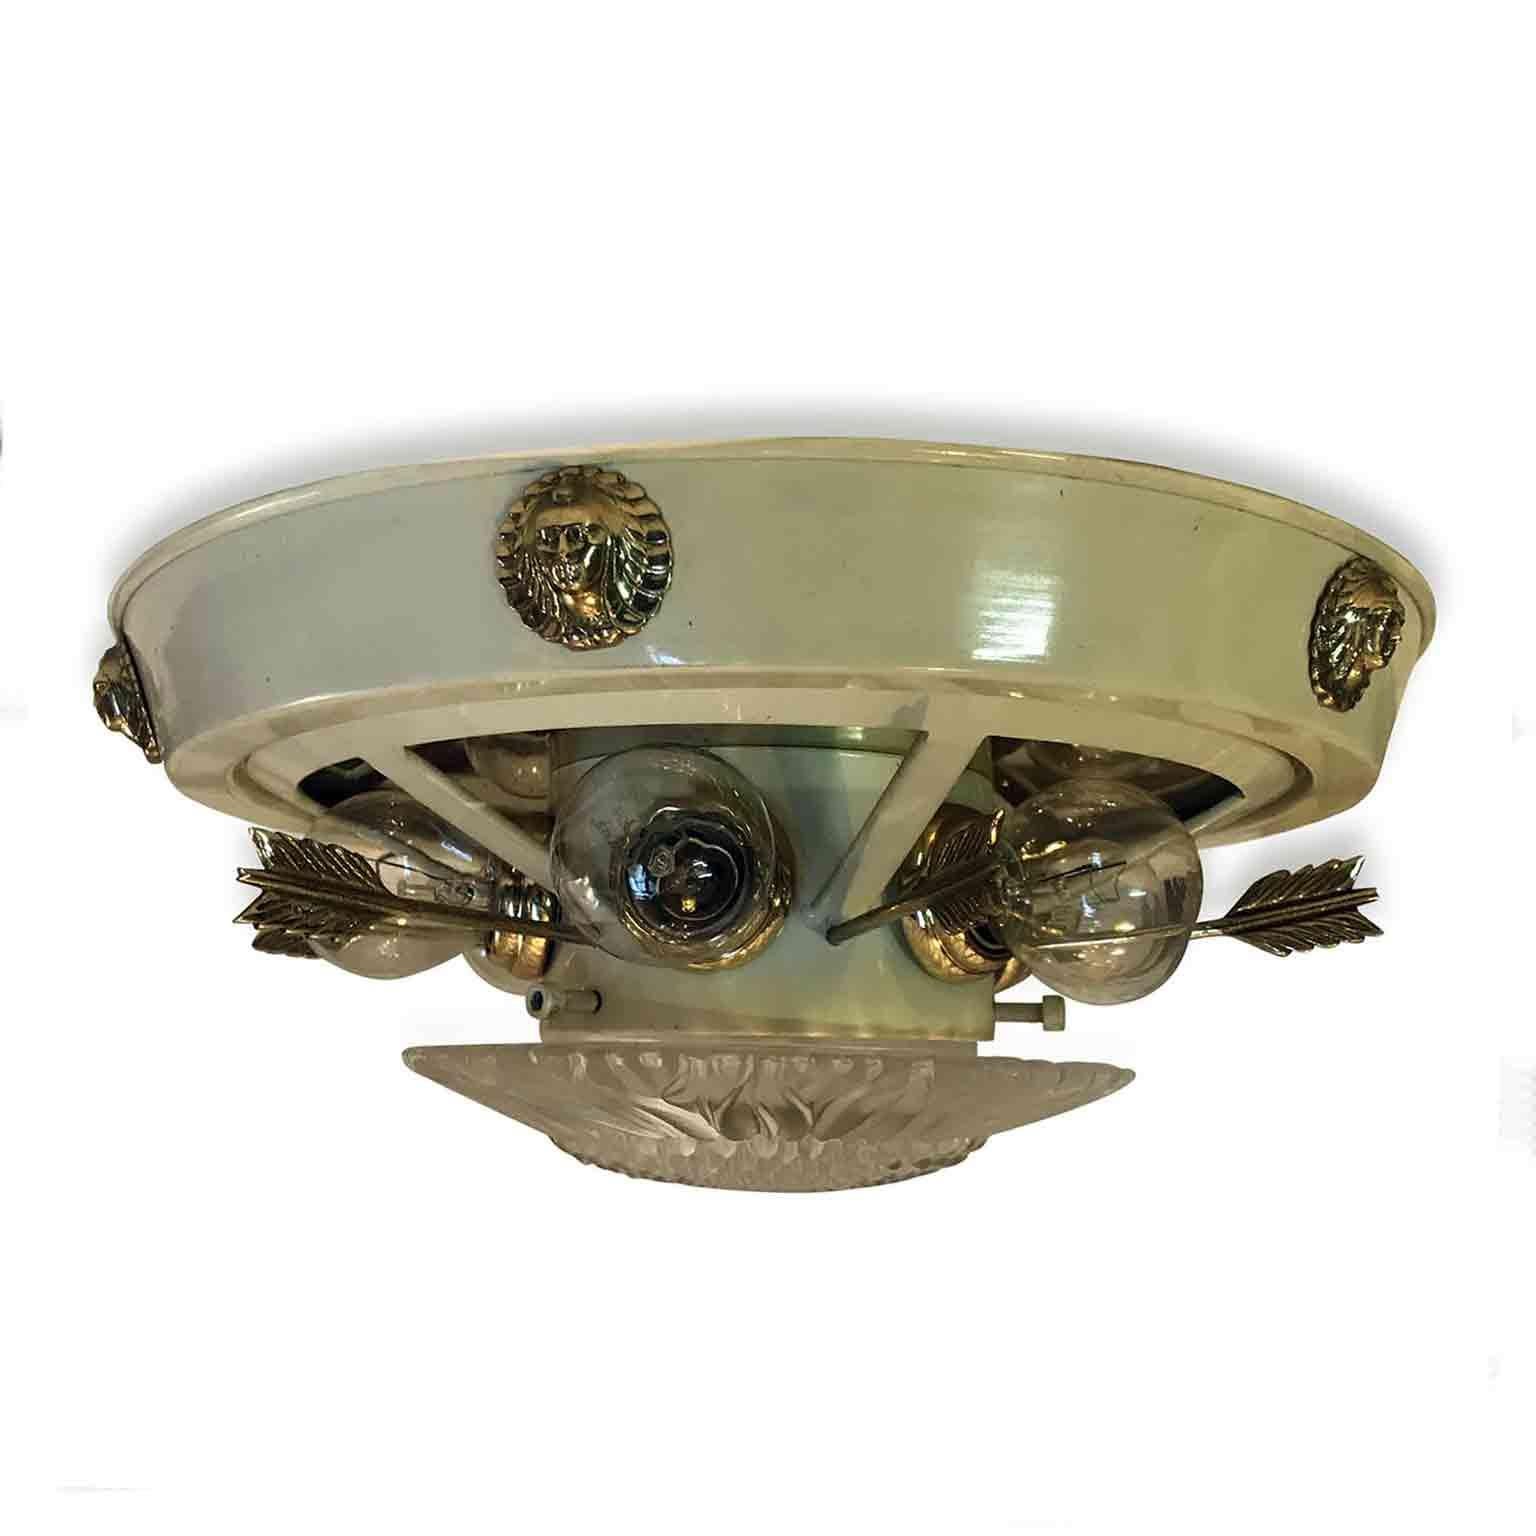 Italian 1980s ceiling light by Banci Firenze, an Empire style circular brass and ivory color painted ceiling fixture, decorated with six cast brass masks on the larger perimeter and six cast brass arrows between each light bulbs. In the center, a